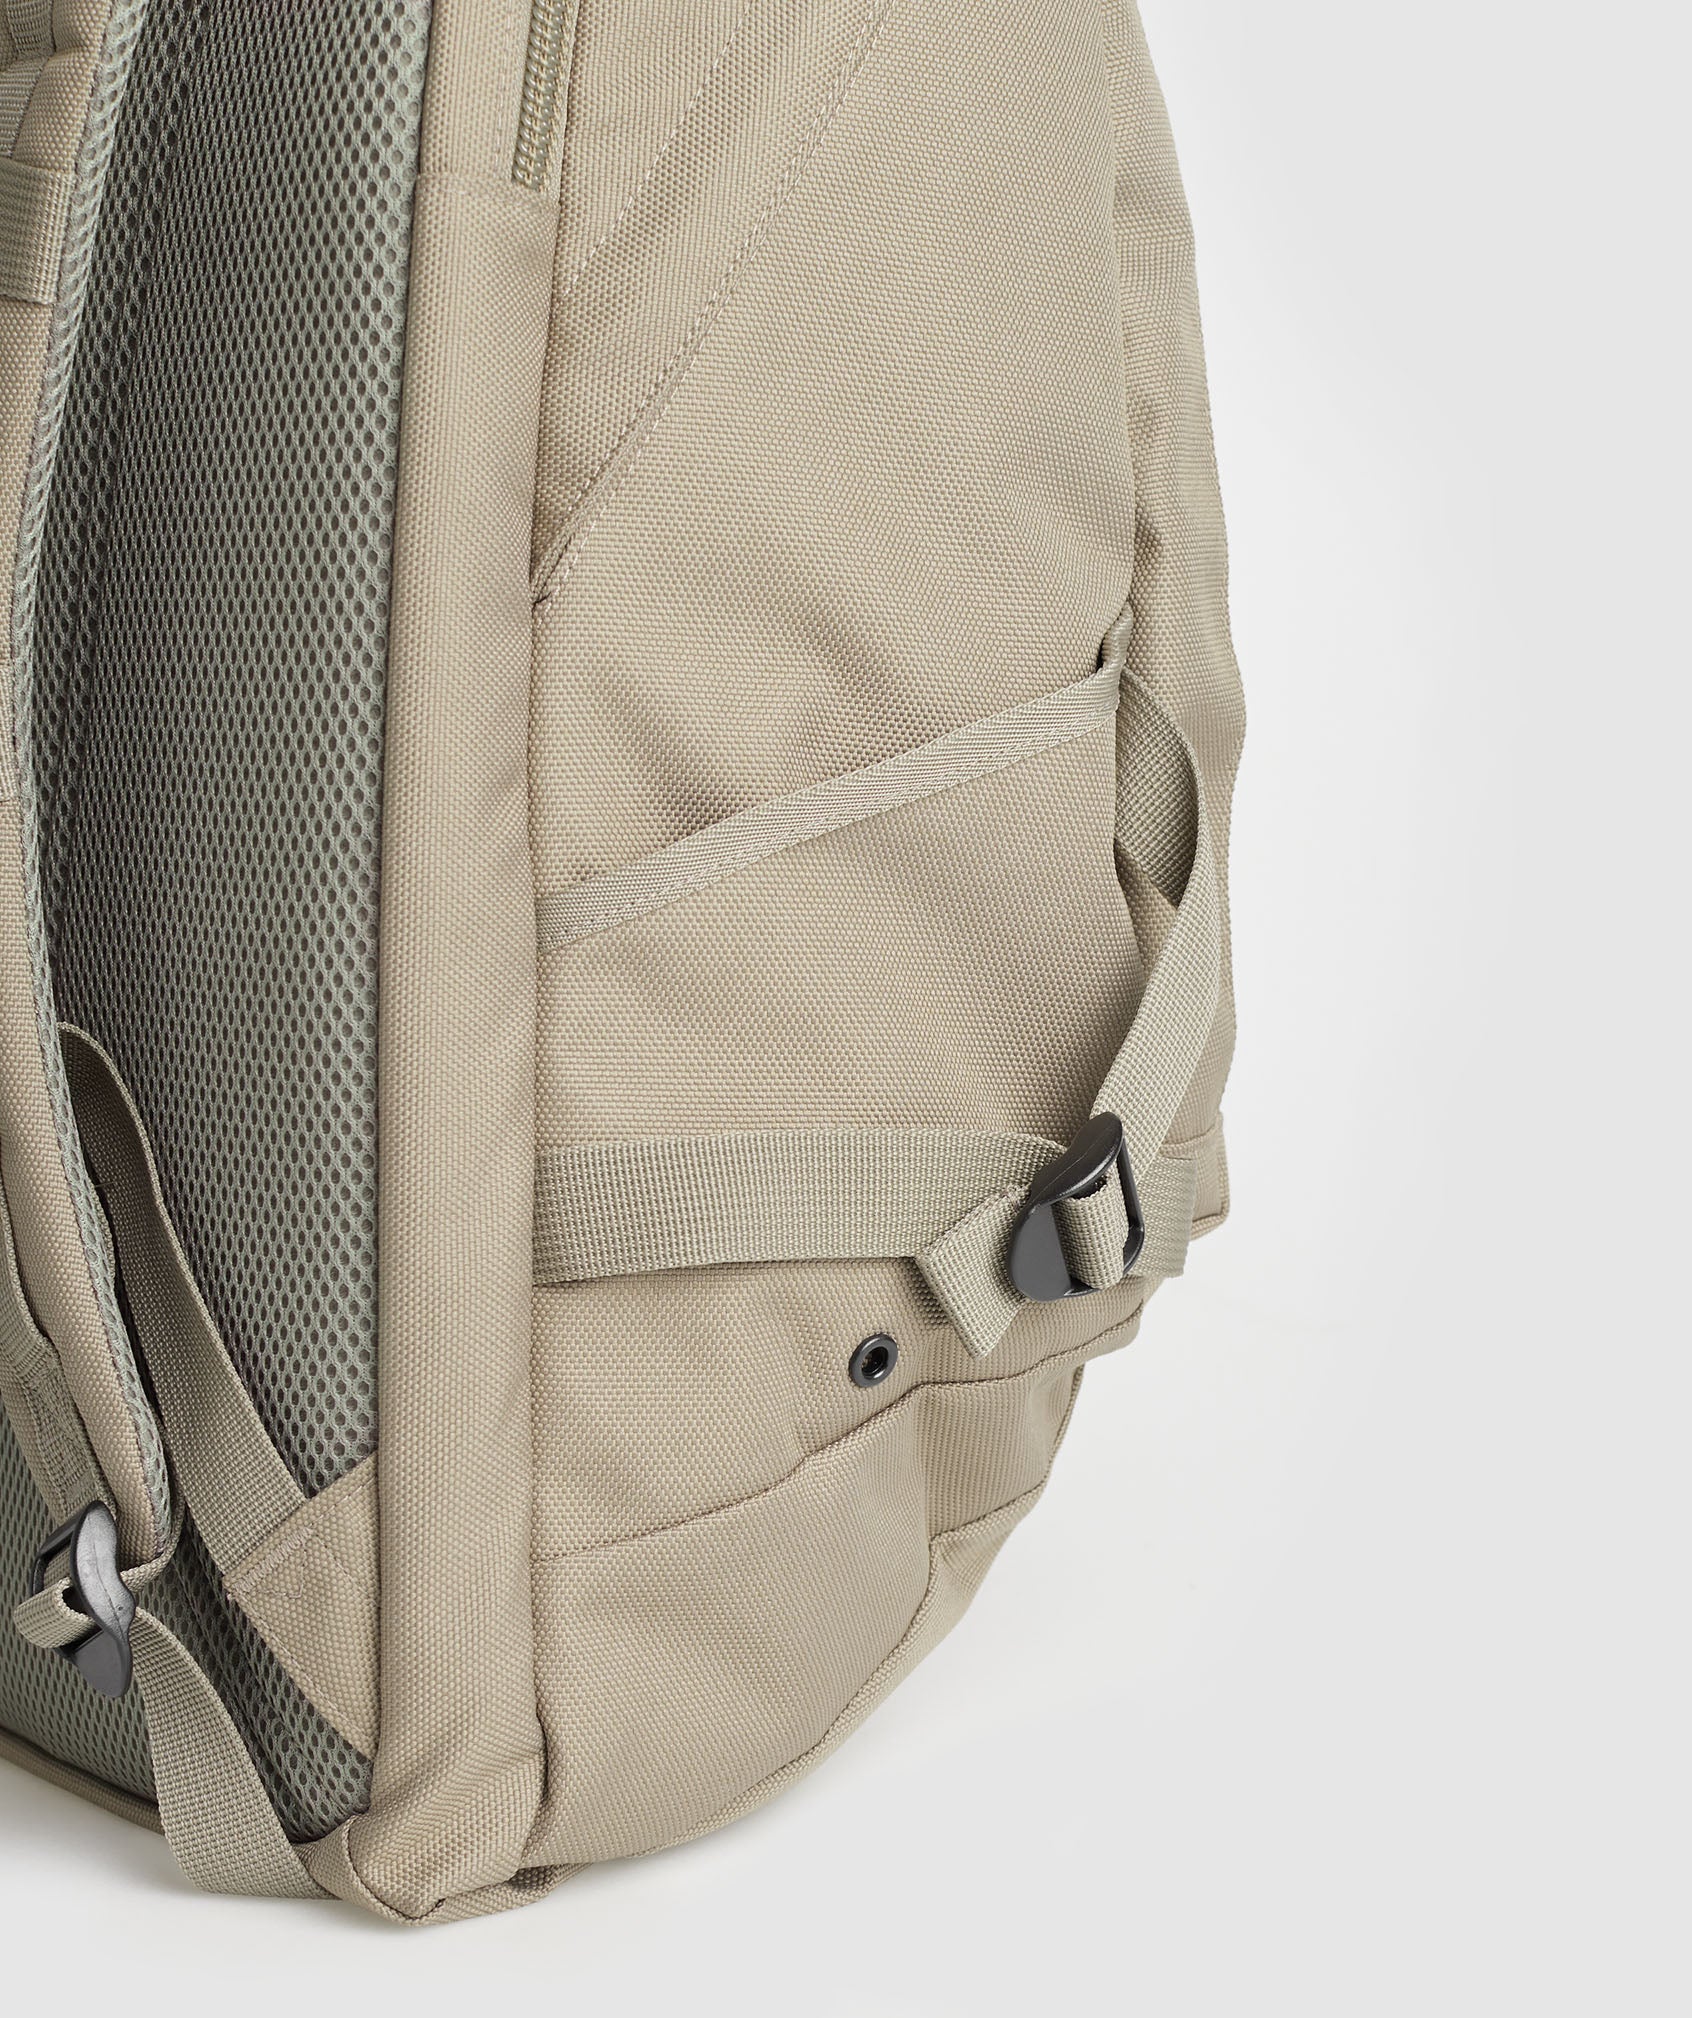 Pursuit Backpack in Brown - view 3